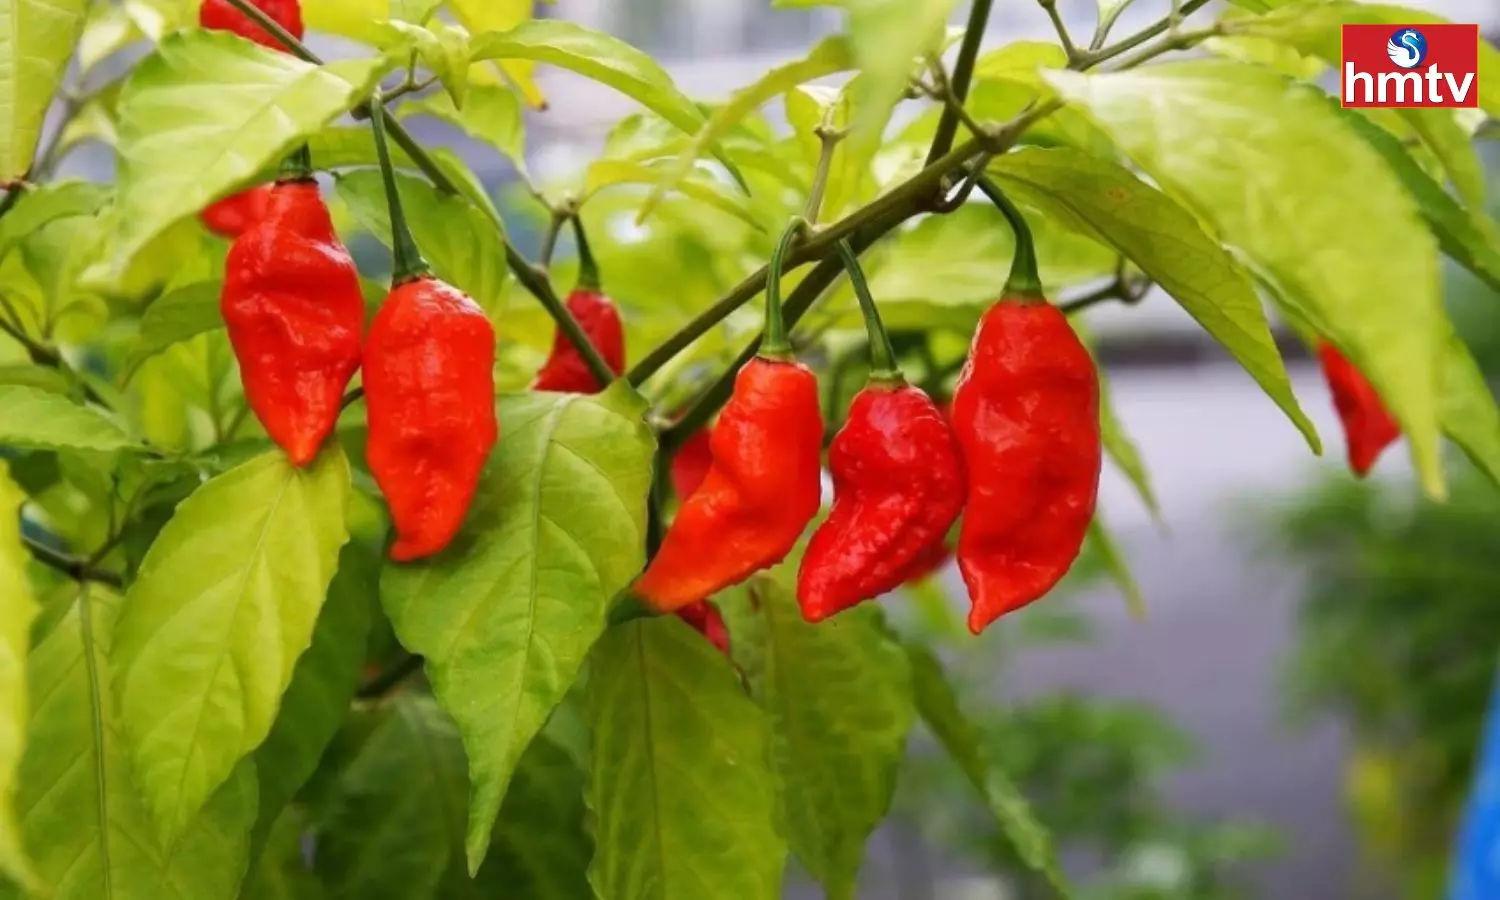 These are the Worlds Spiciest Chilies That People are Afraid to Eat